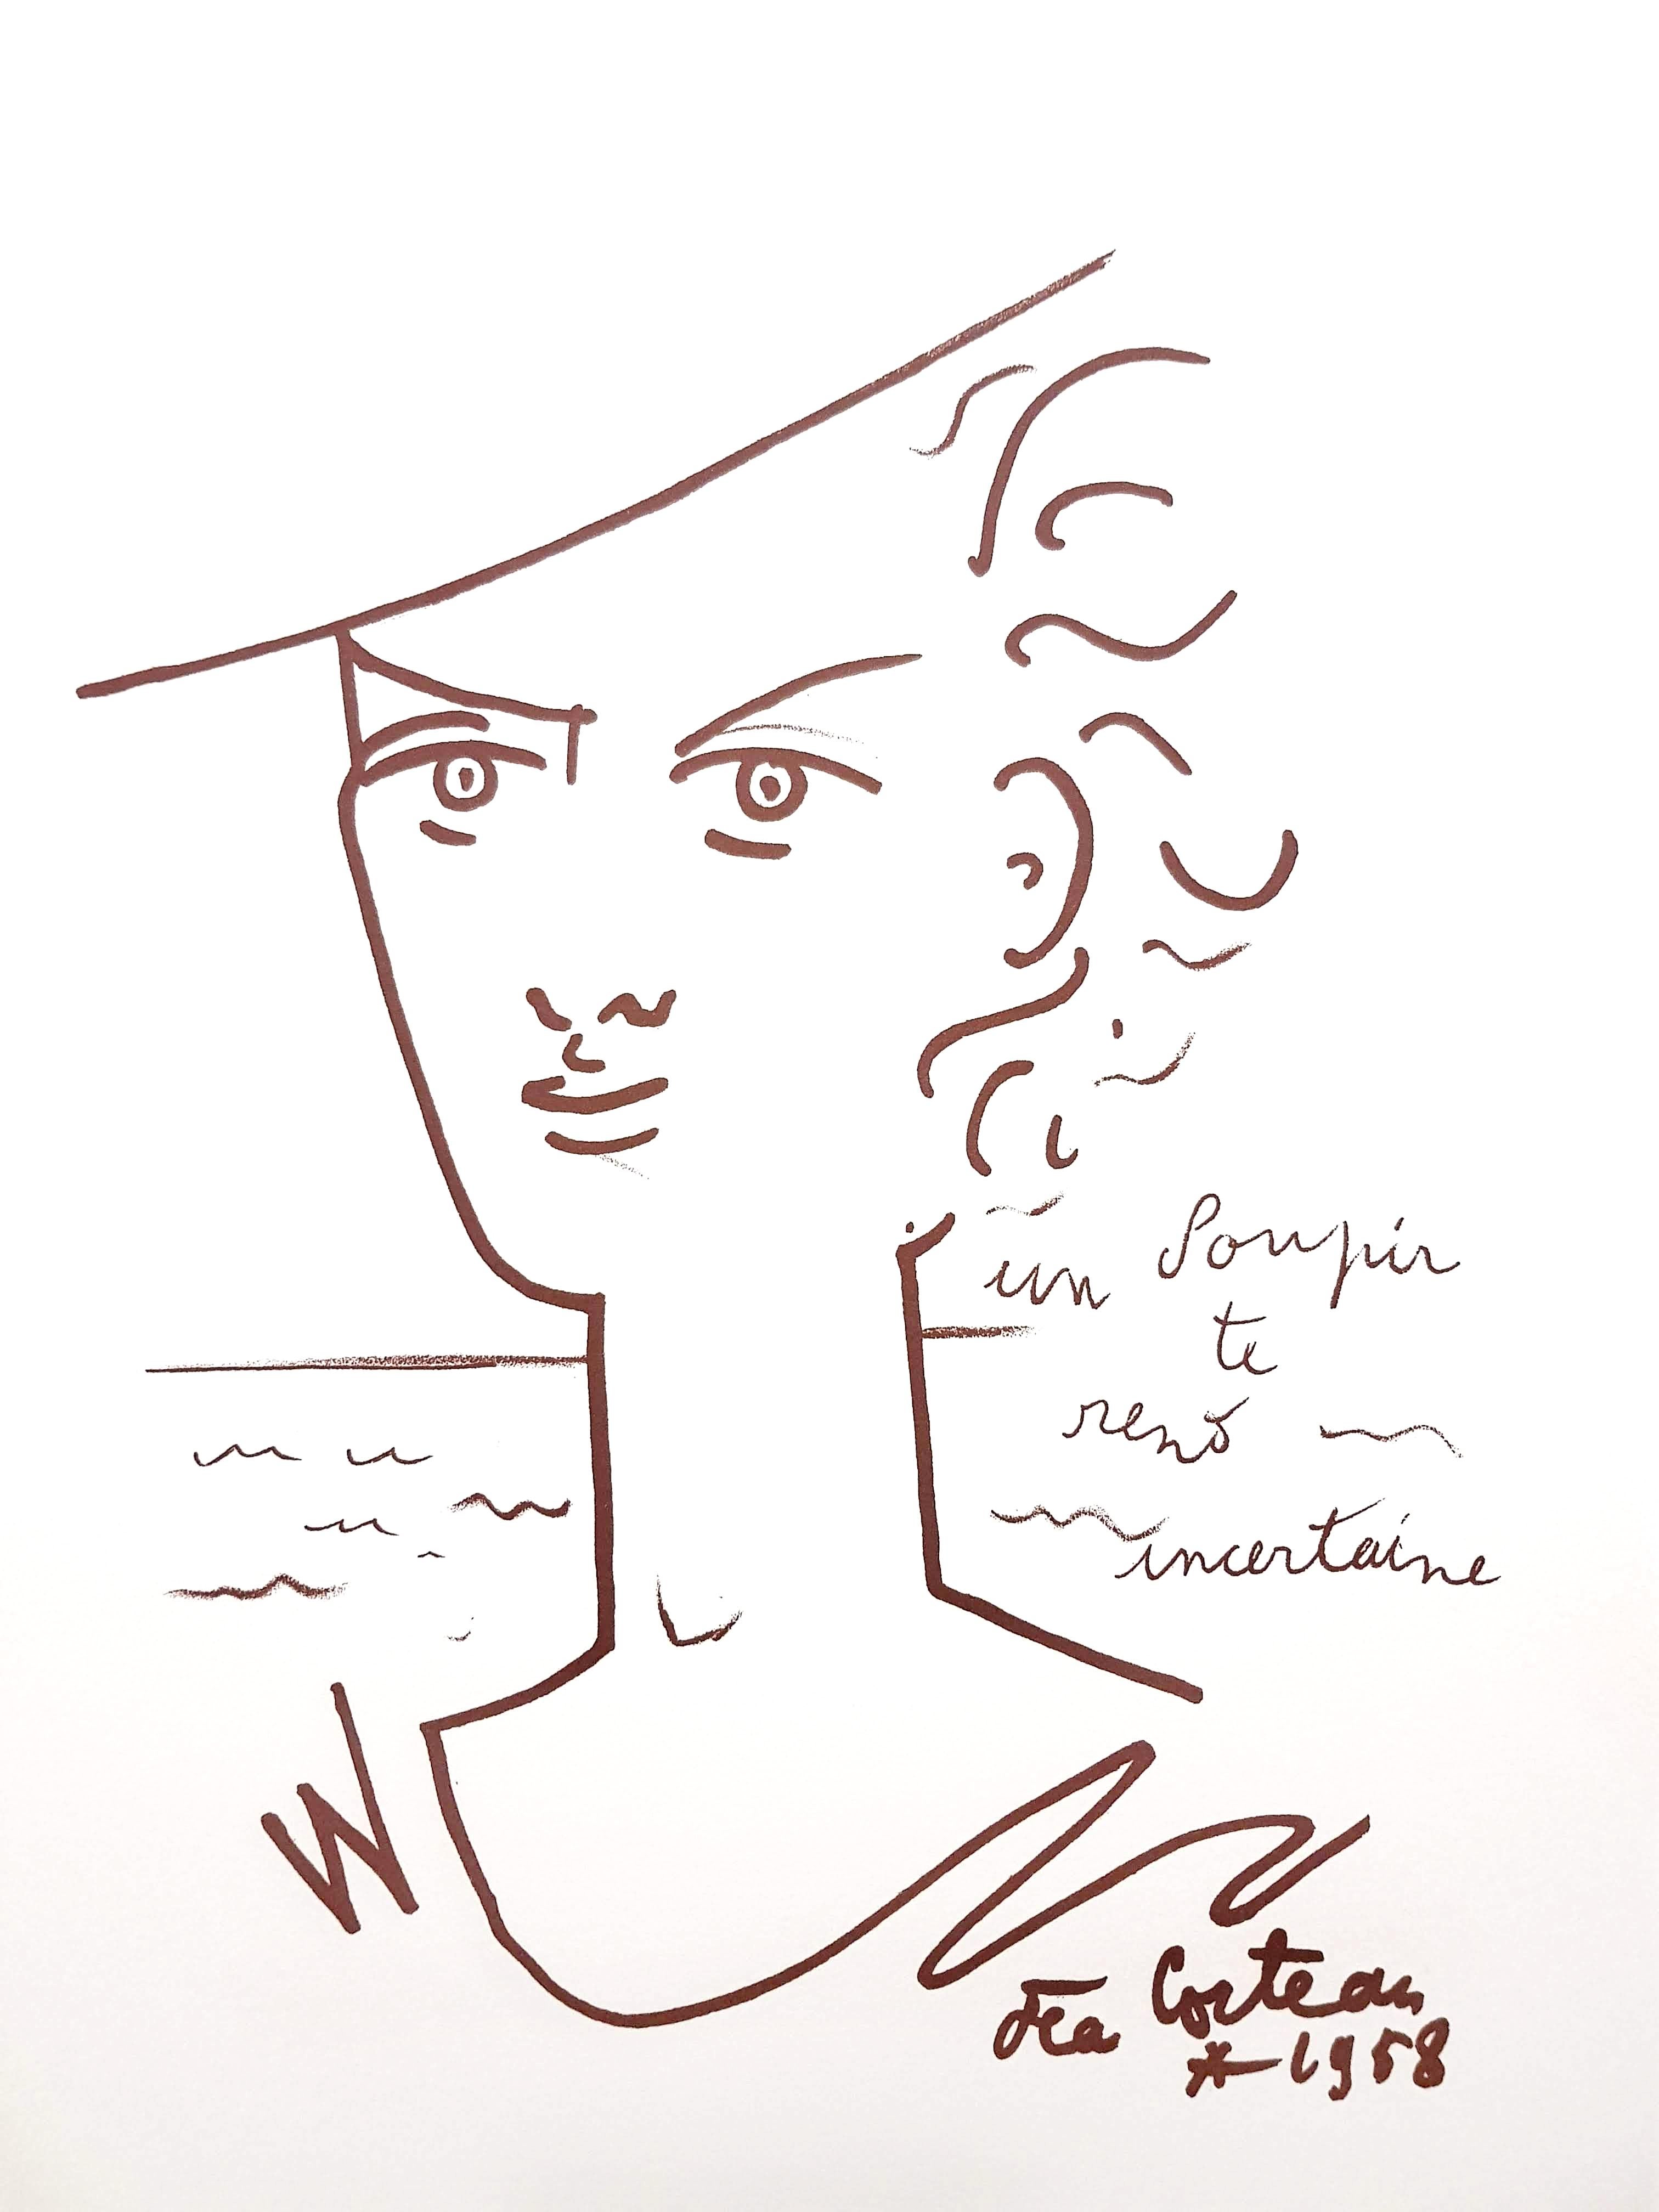 Original Lithograph by Jean Cocteau
Title: Woman Portrait 
Signed in the plate
Dimensions: 32 x 25.5 cm
Edition: 200
1959
Publisher: Bibliophiles Du Palais
Unnumbered as issued